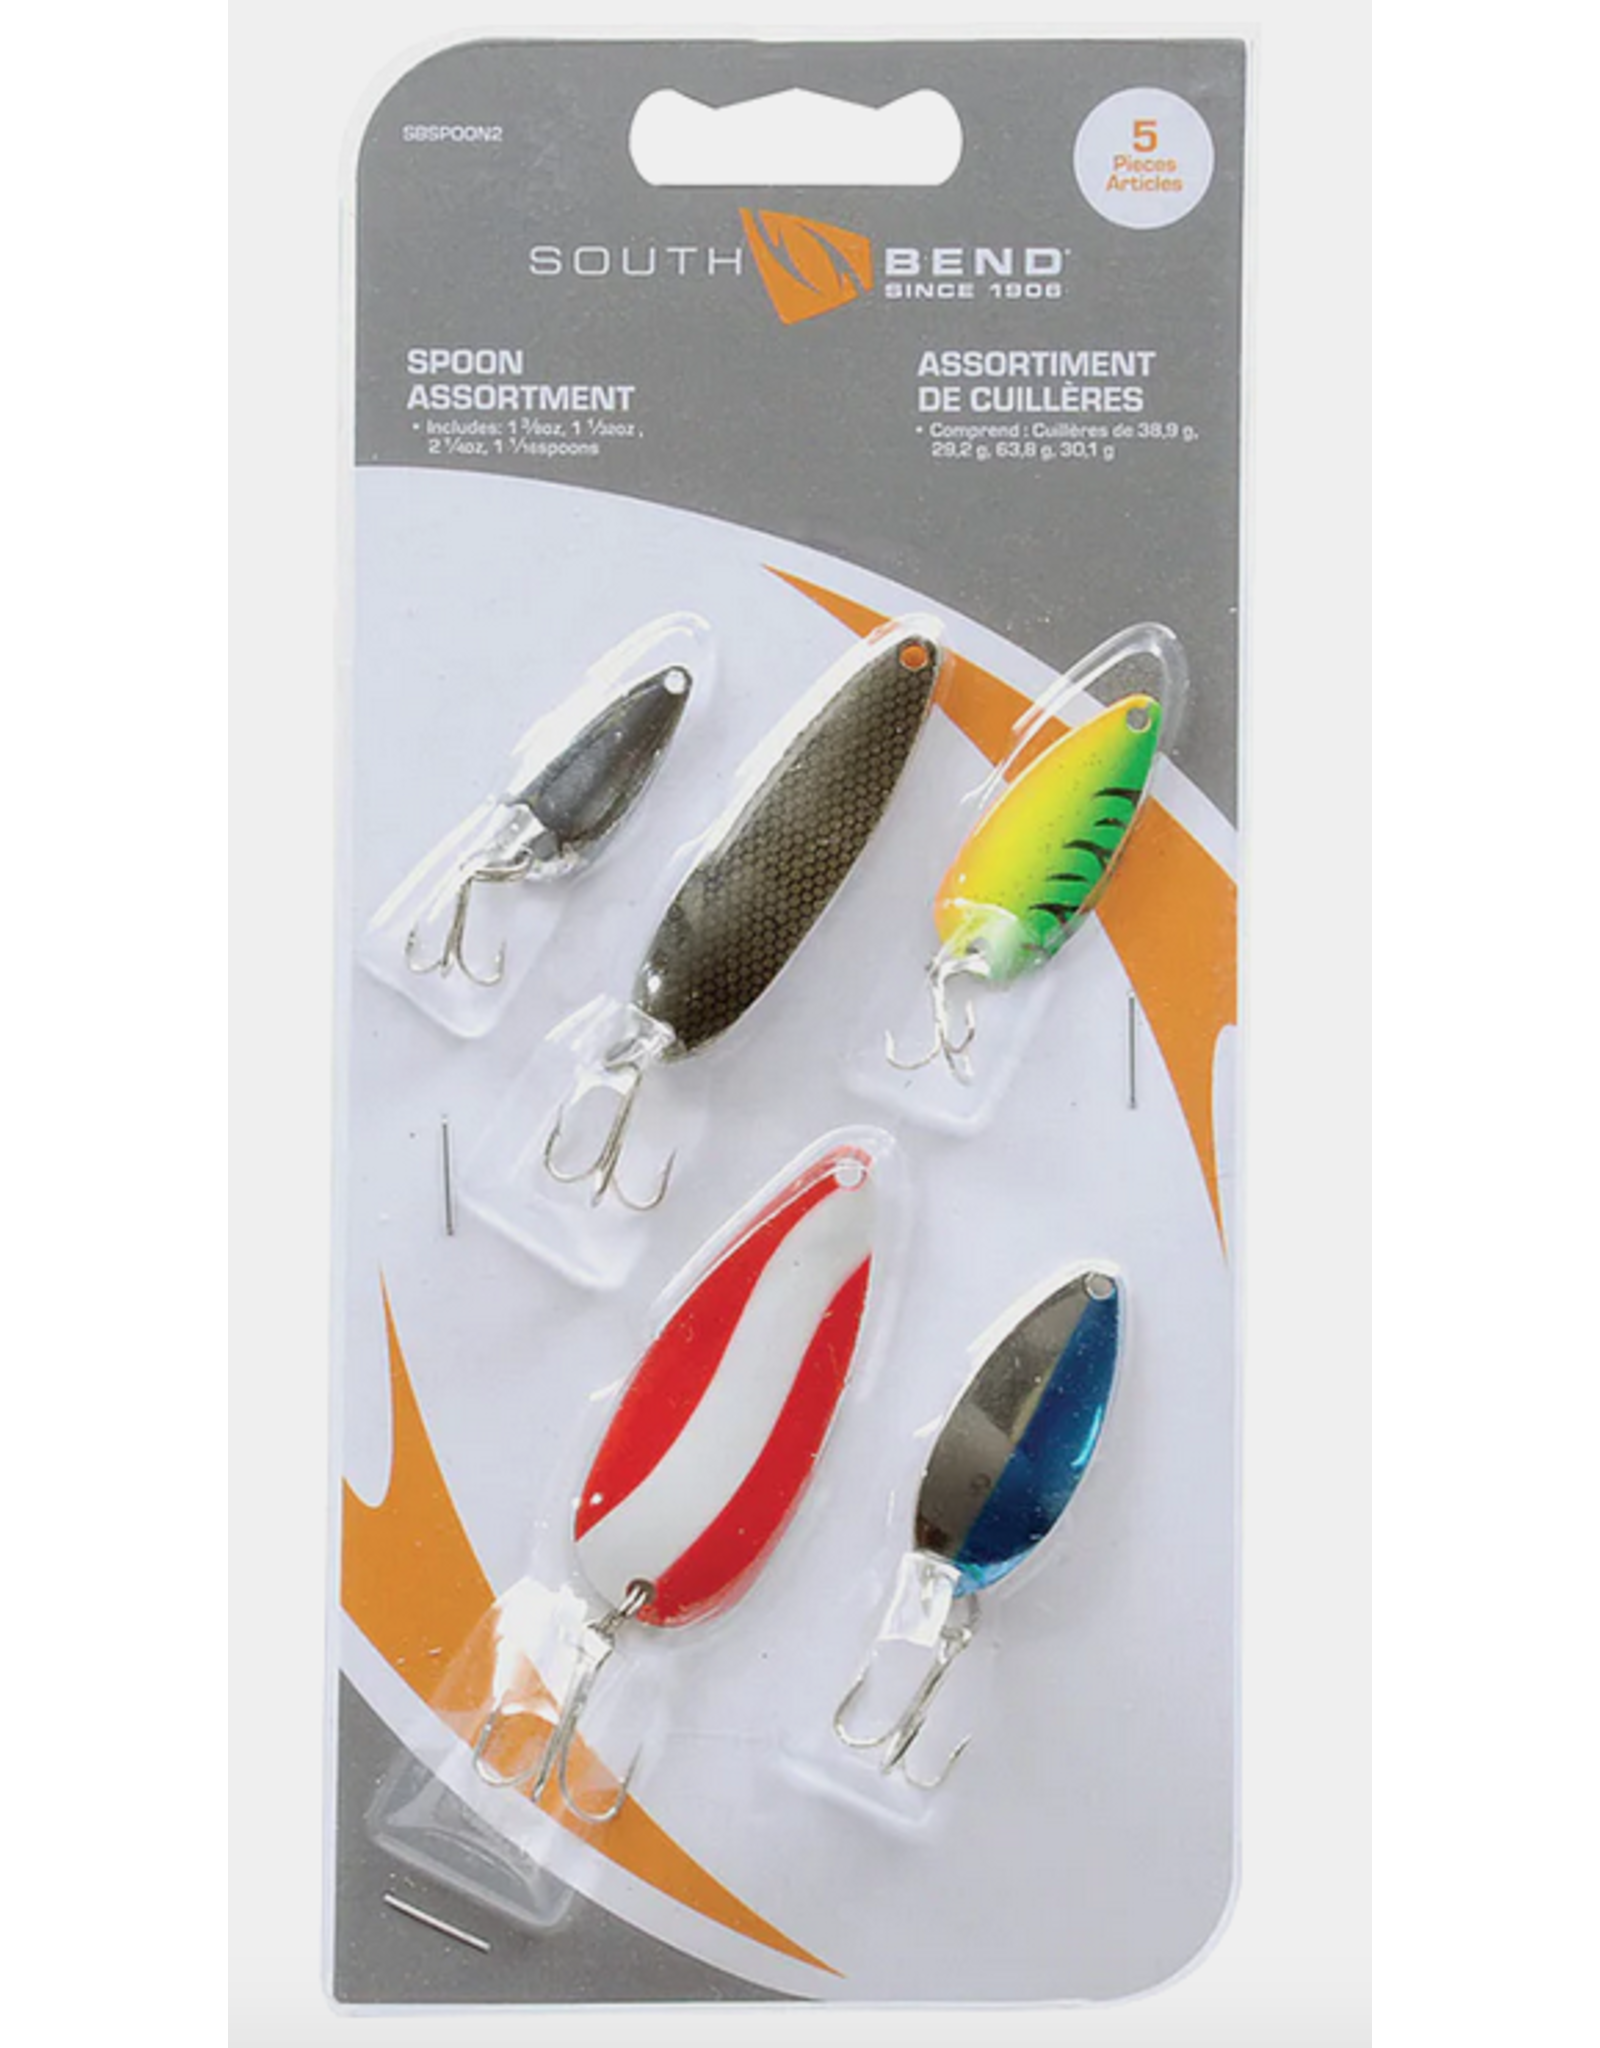 South Bend Spoon Assortment - Royal Gorge Anglers